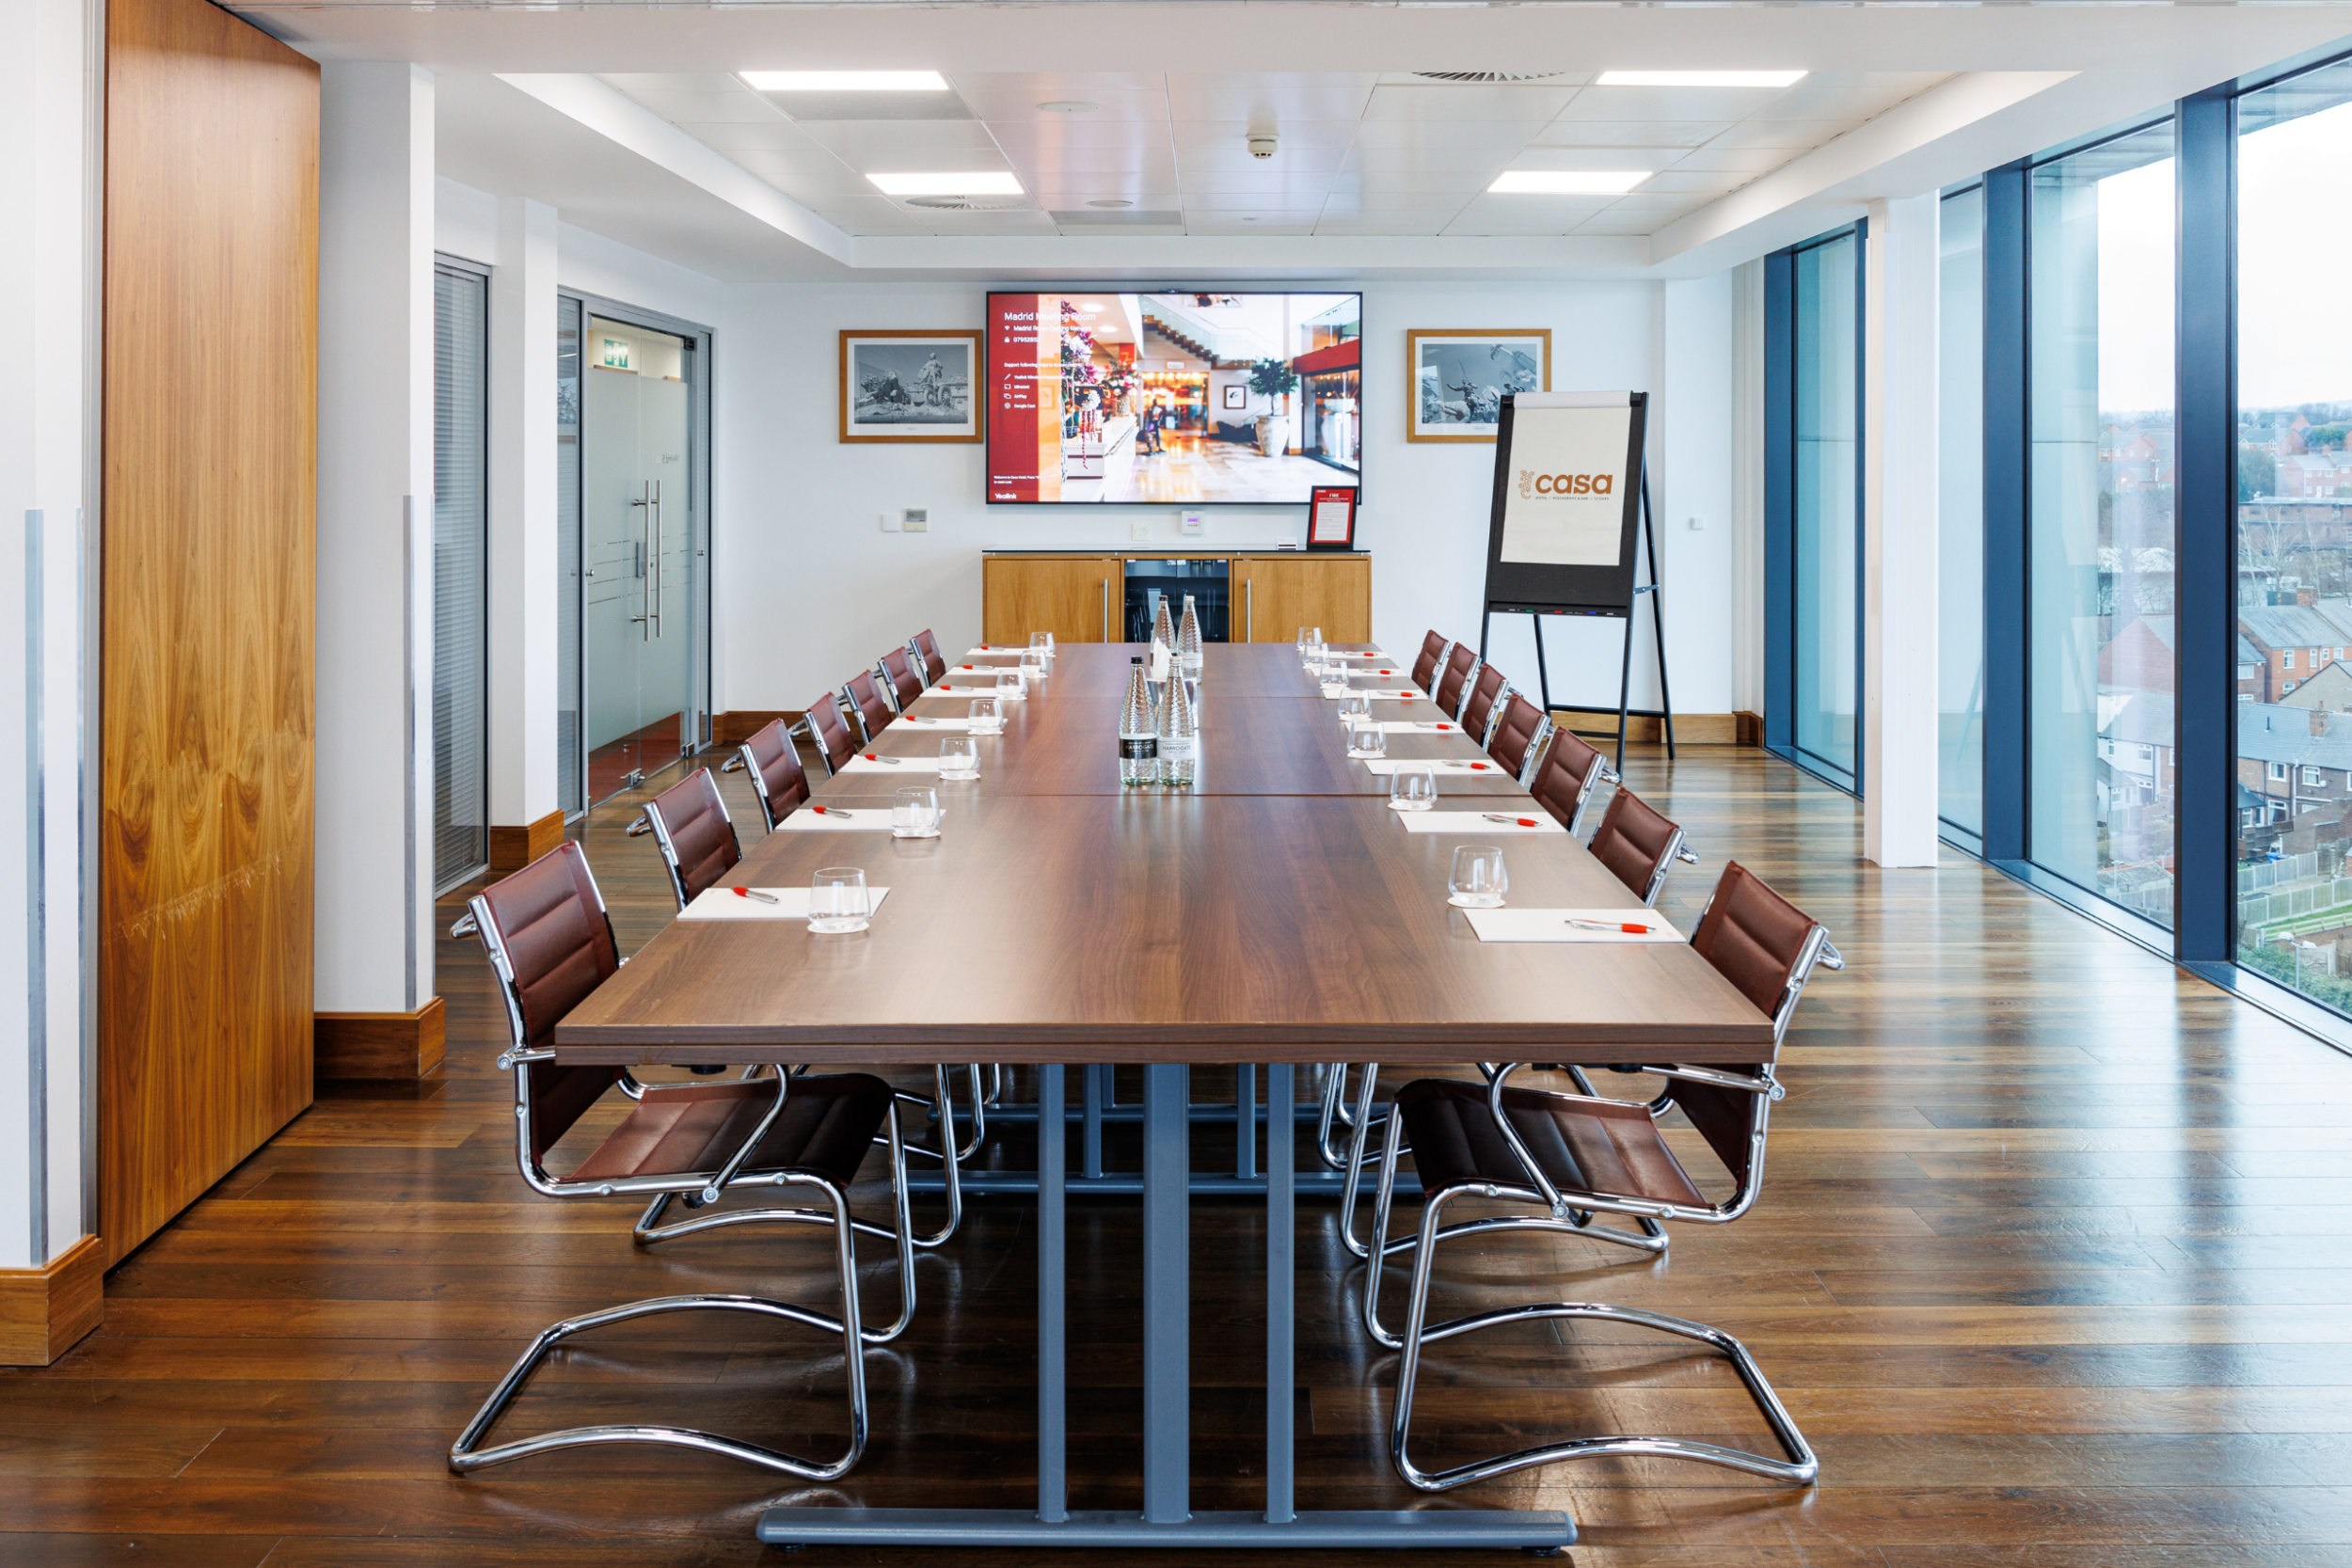 Casa Hotel conferencing and meeting space, Madrid Suite | Corporate events Chesterfield